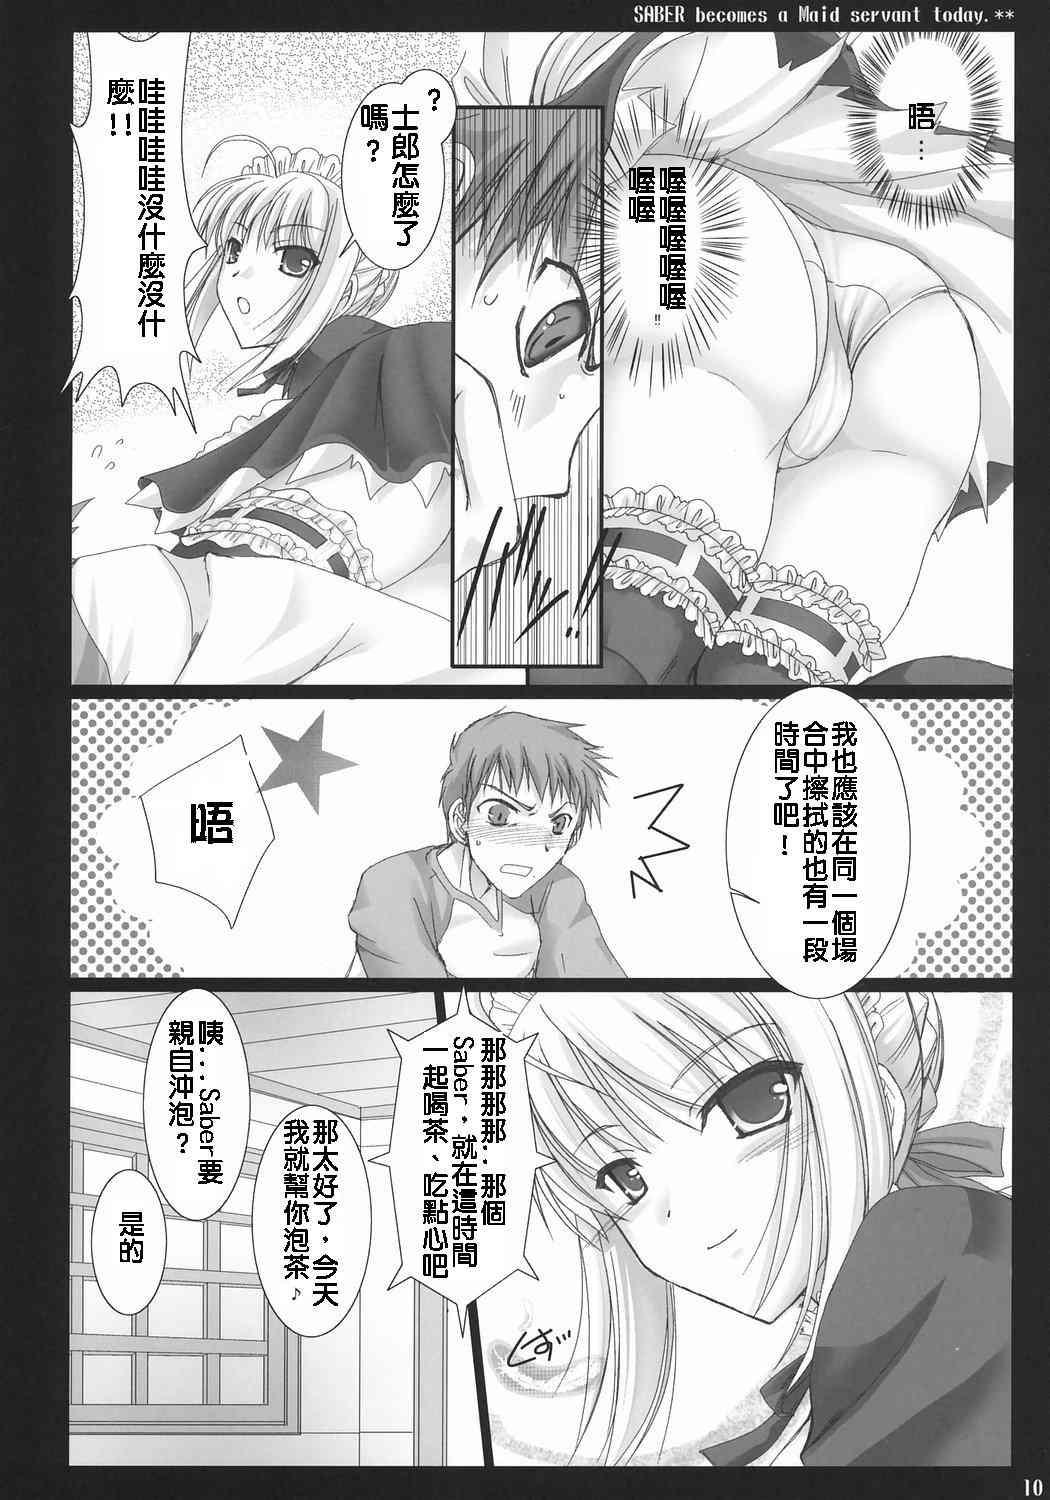 Francaise Kyou Dake Desuyo? - Fate stay night Fit - Page 9